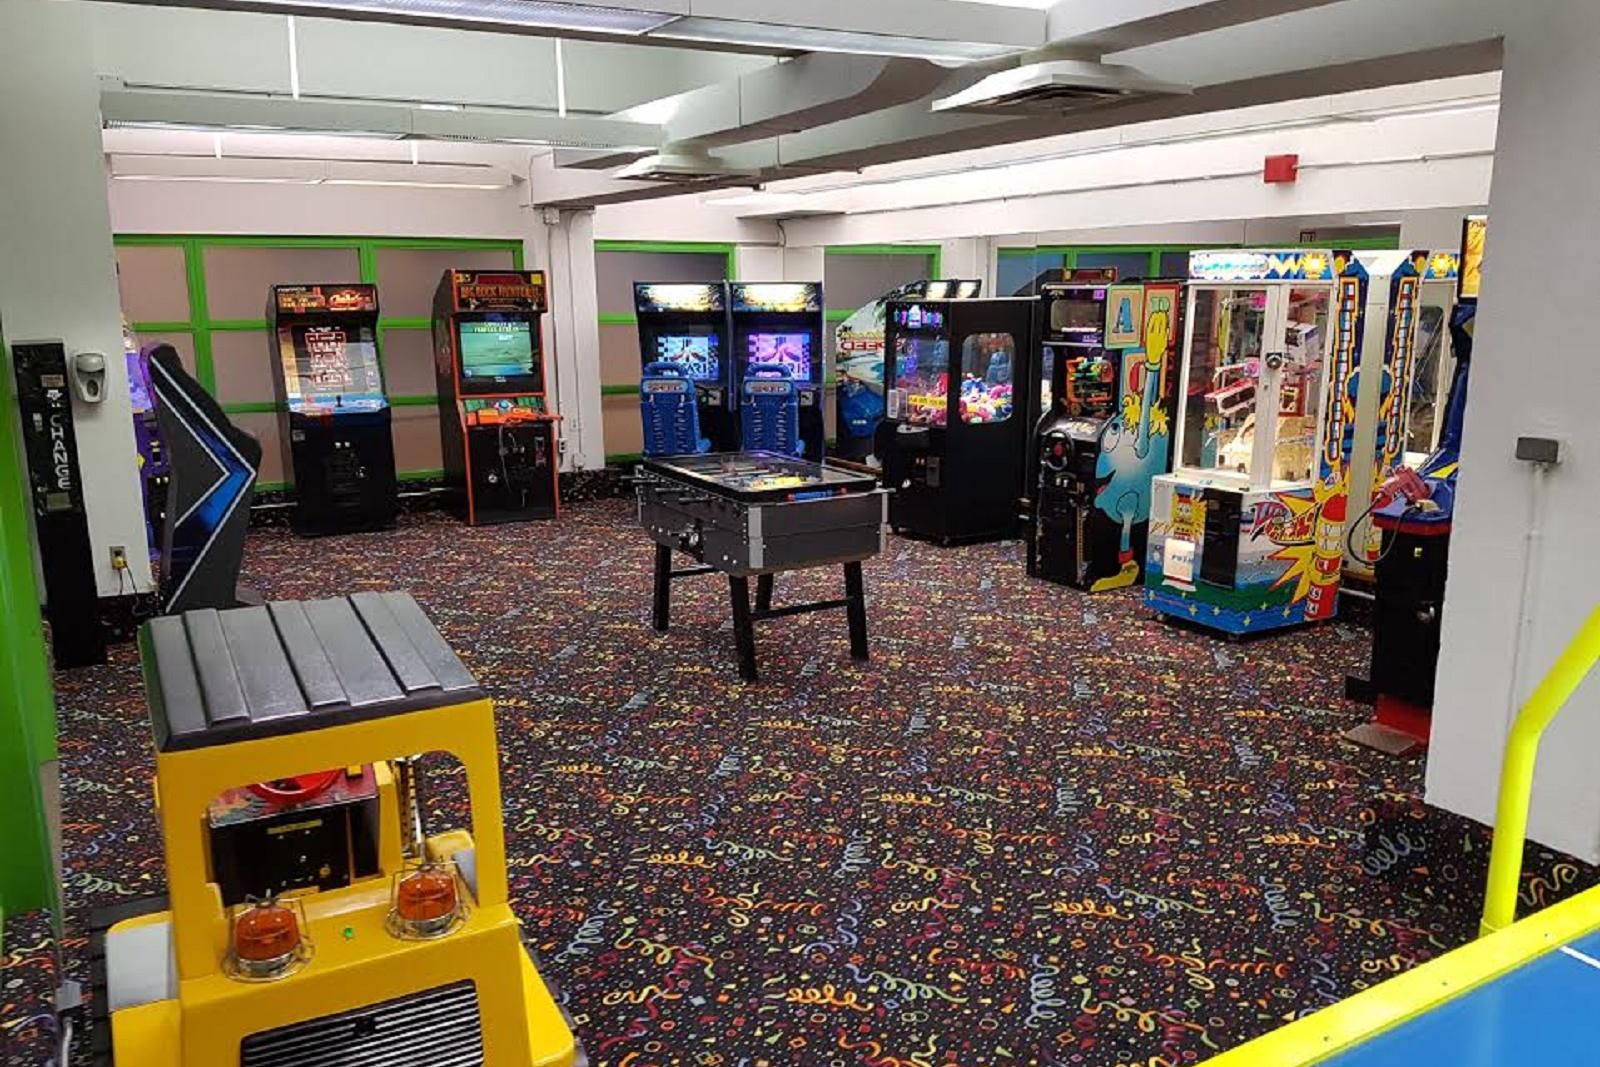 Play some fun game with family in our arcade